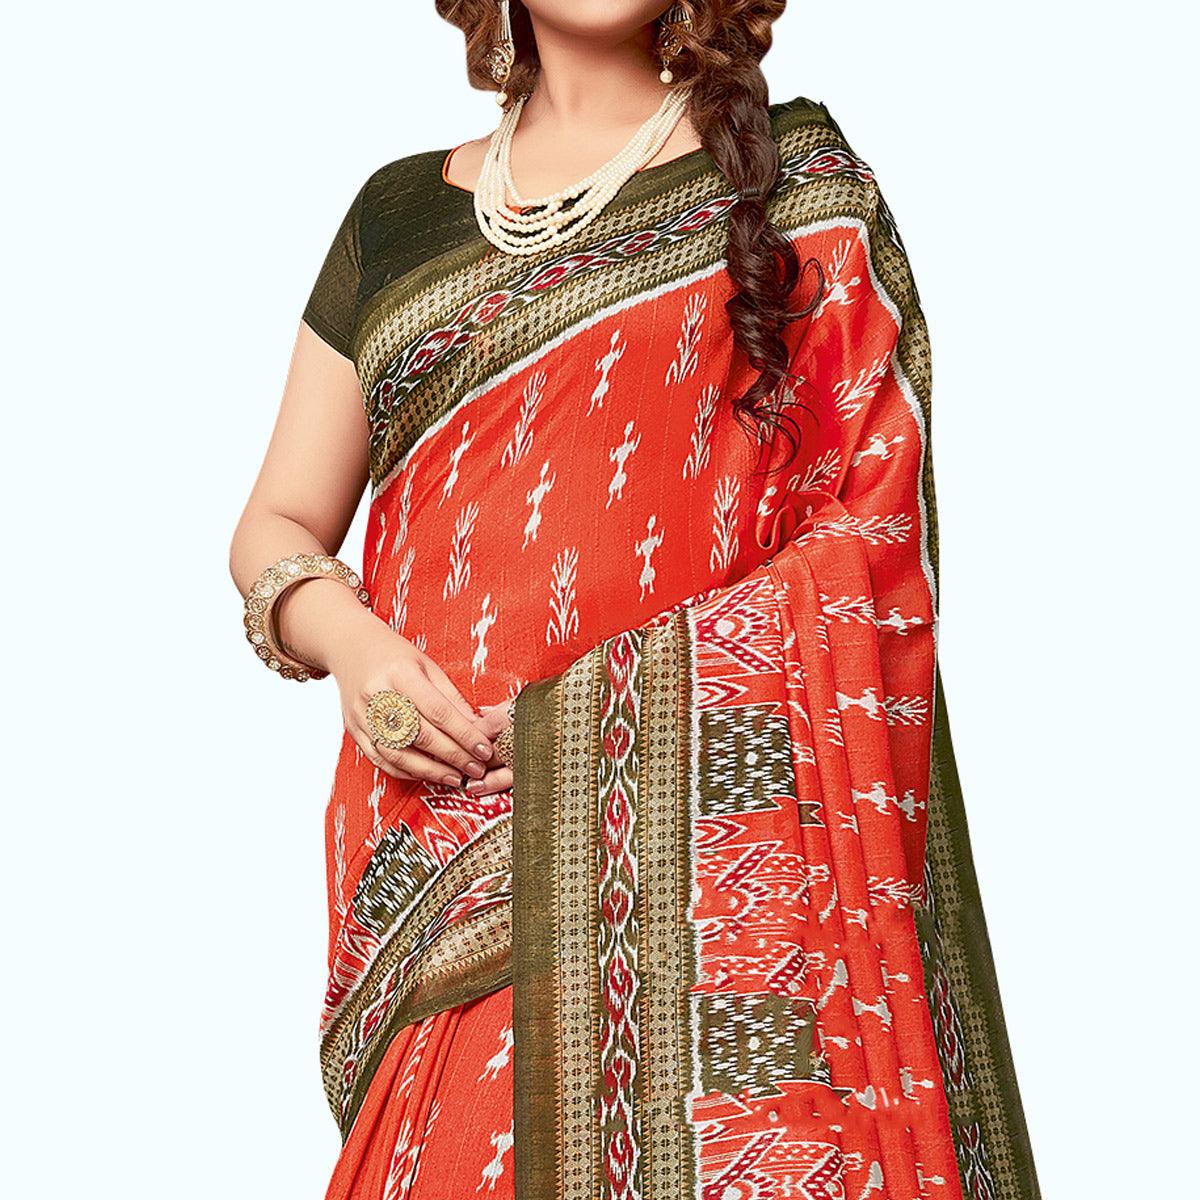 Jazzy Coral Red Colored Casual Wear Printed Art Silk Saree - Peachmode